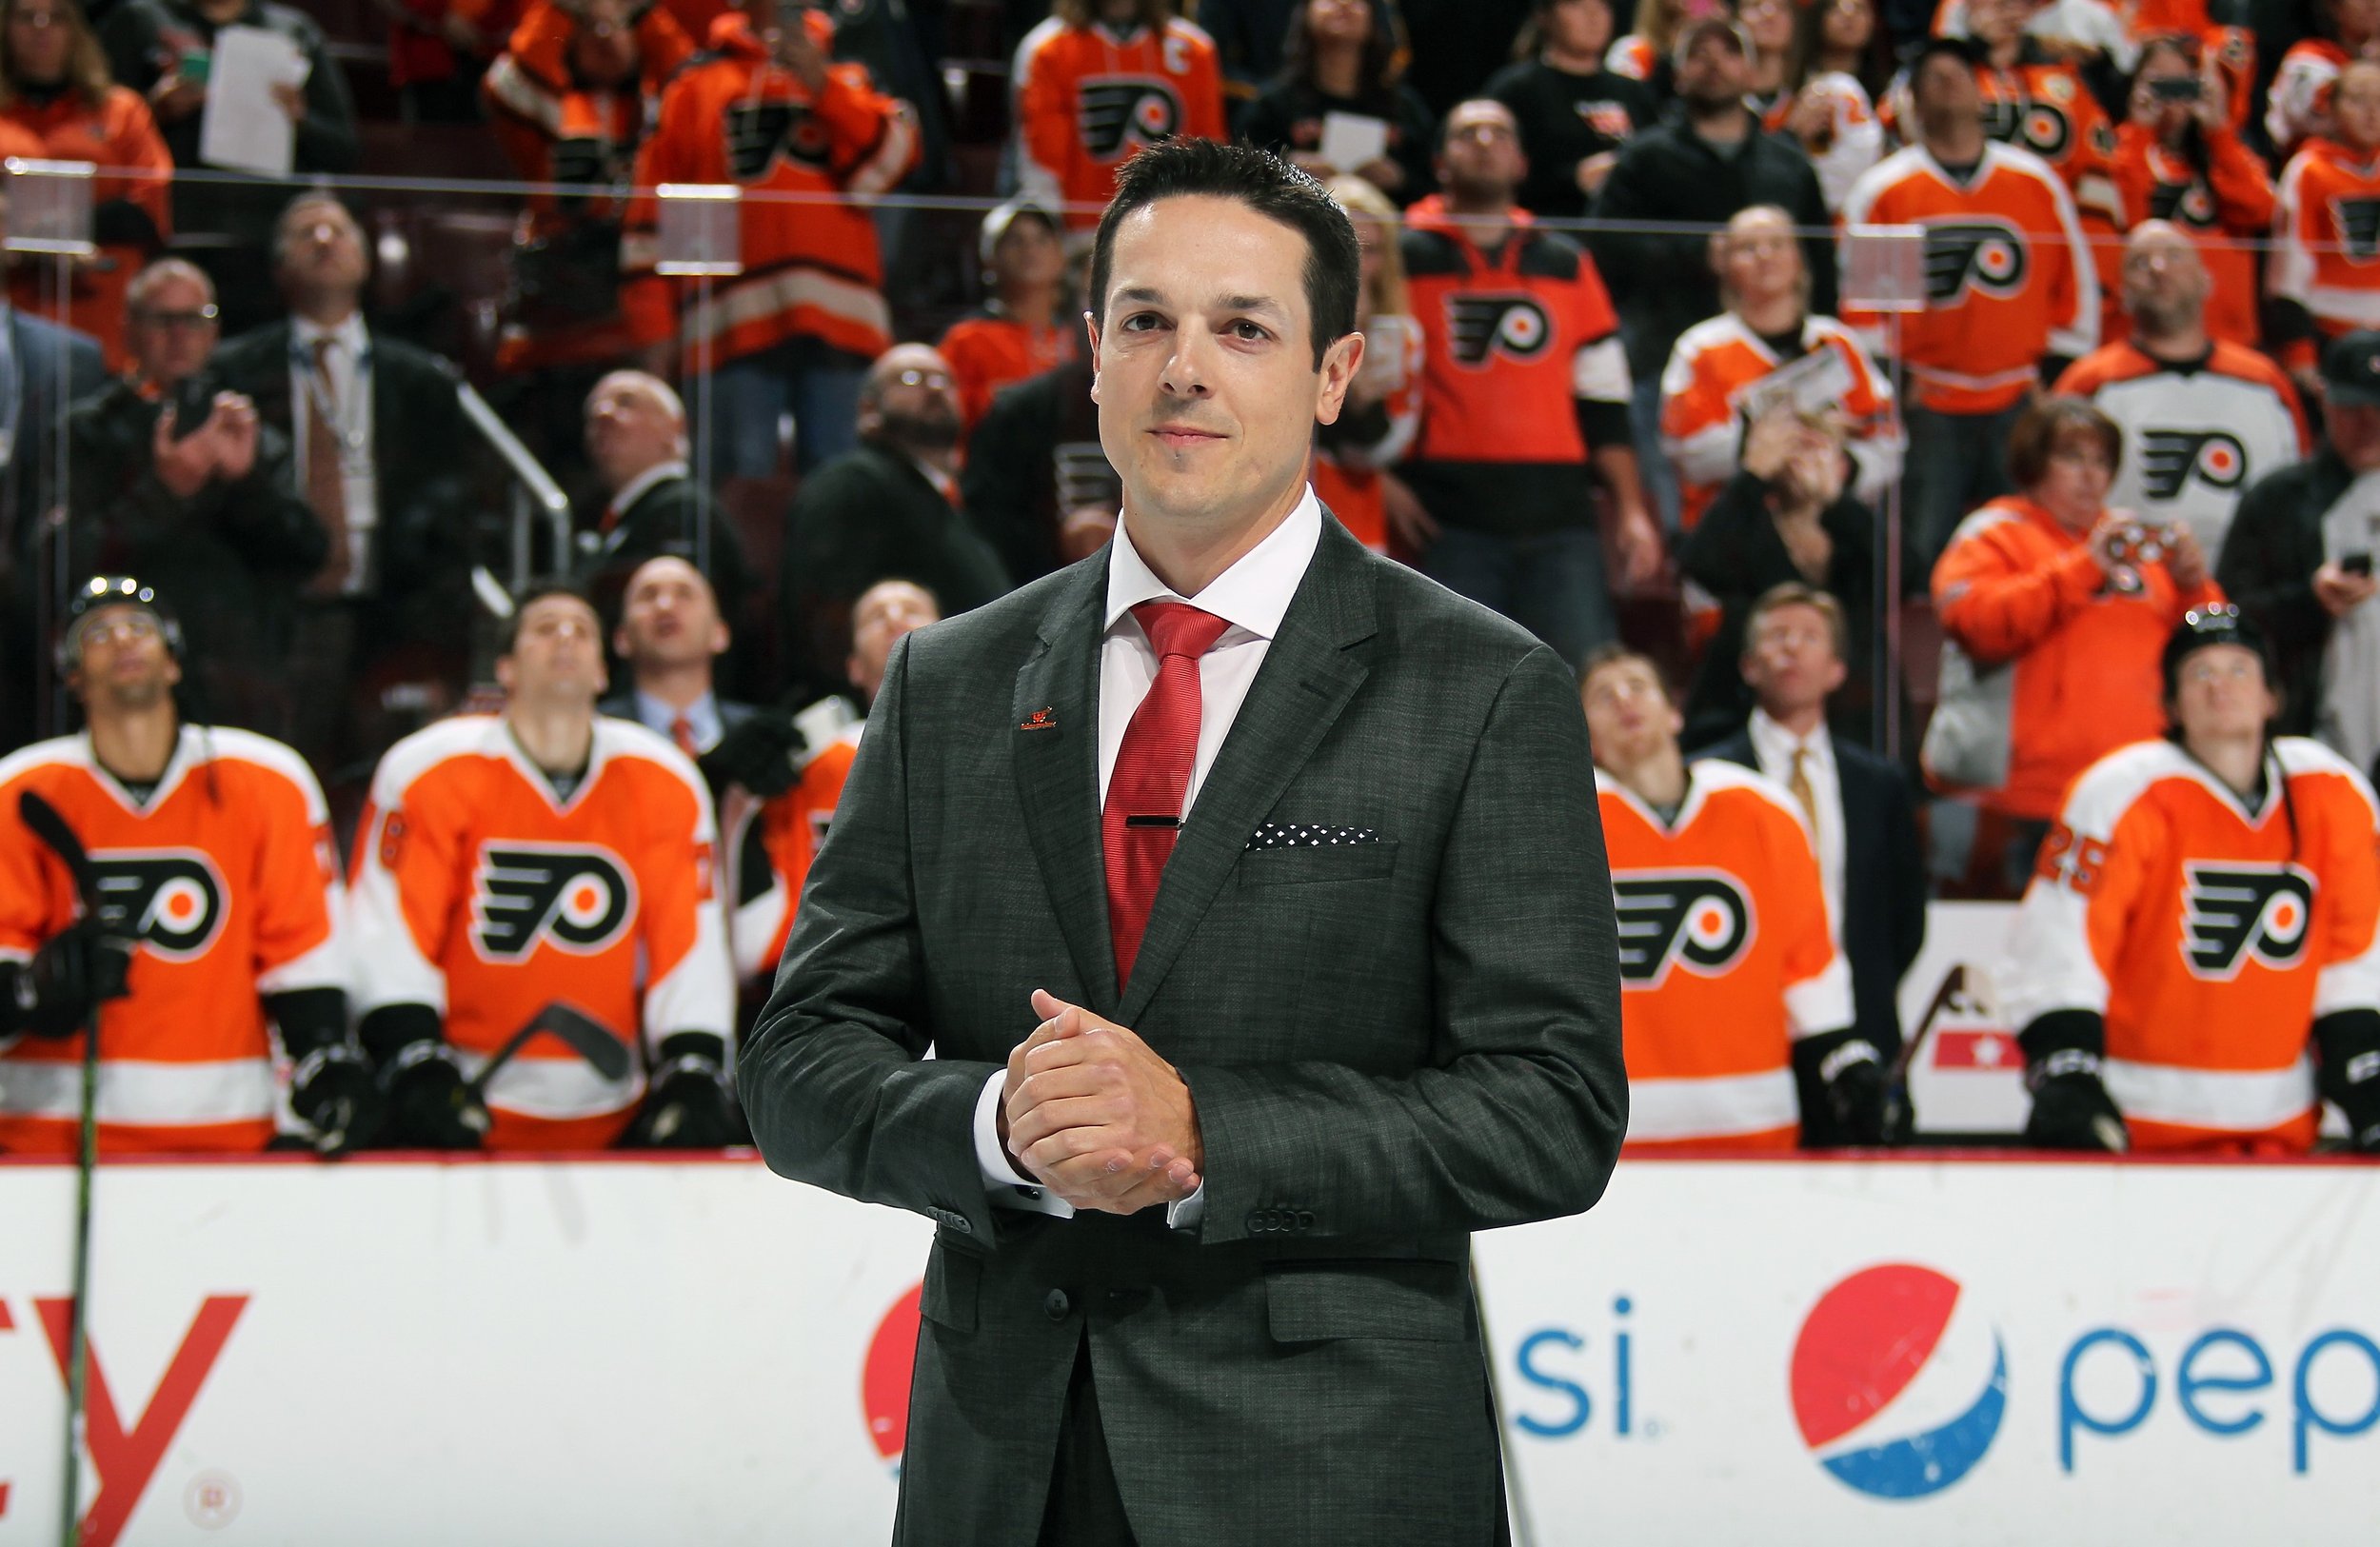 Flyers Promote Briere to “Special Assistant to the GM”